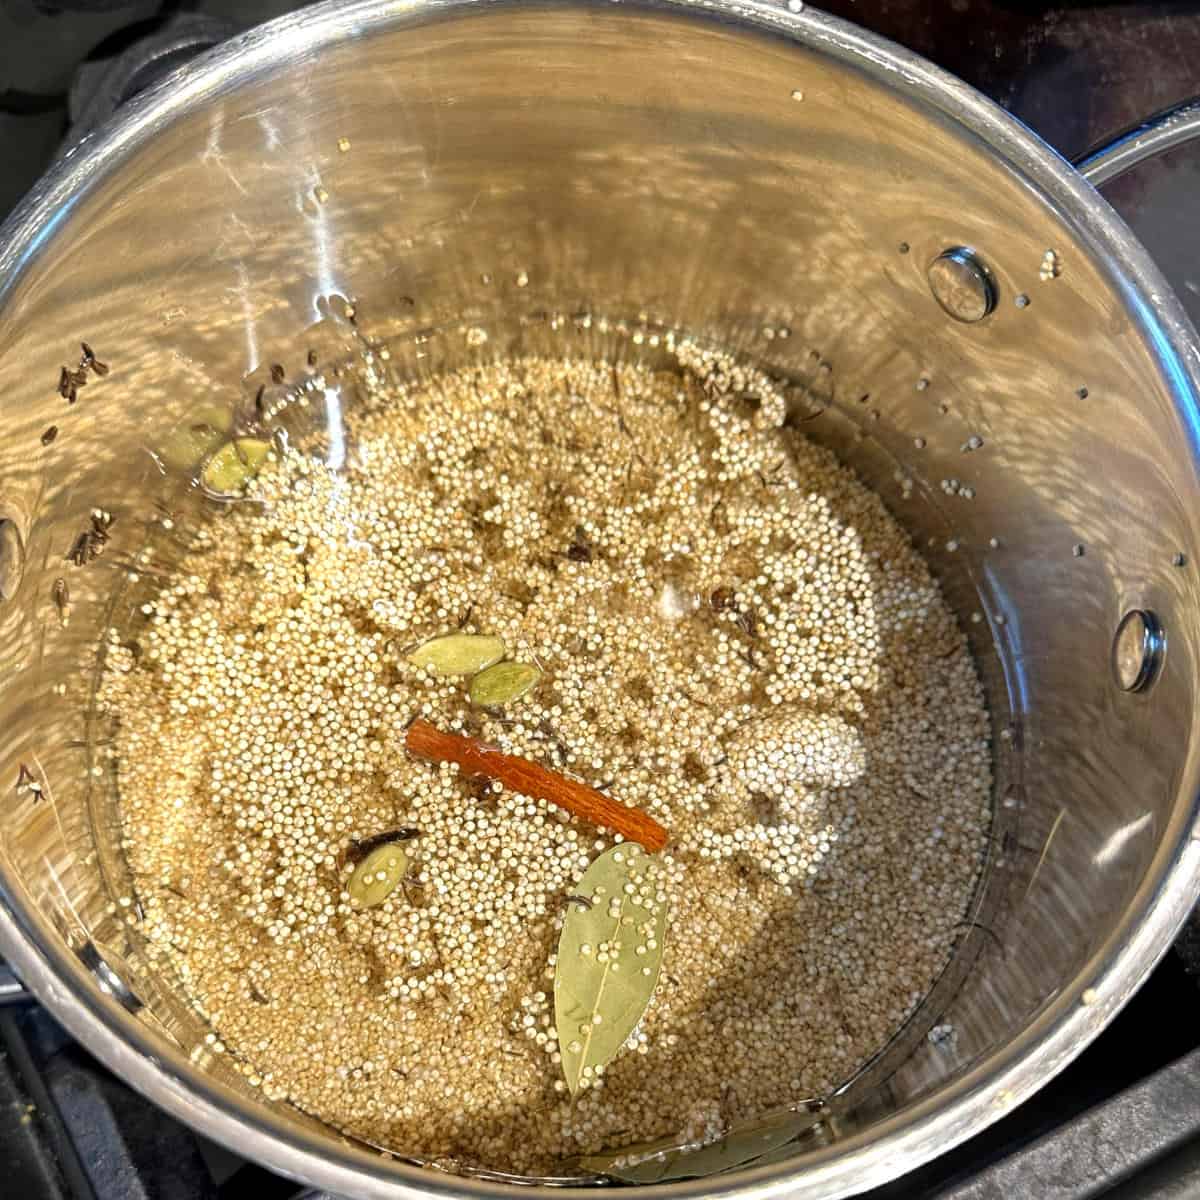 Quinoa added to water with spices.